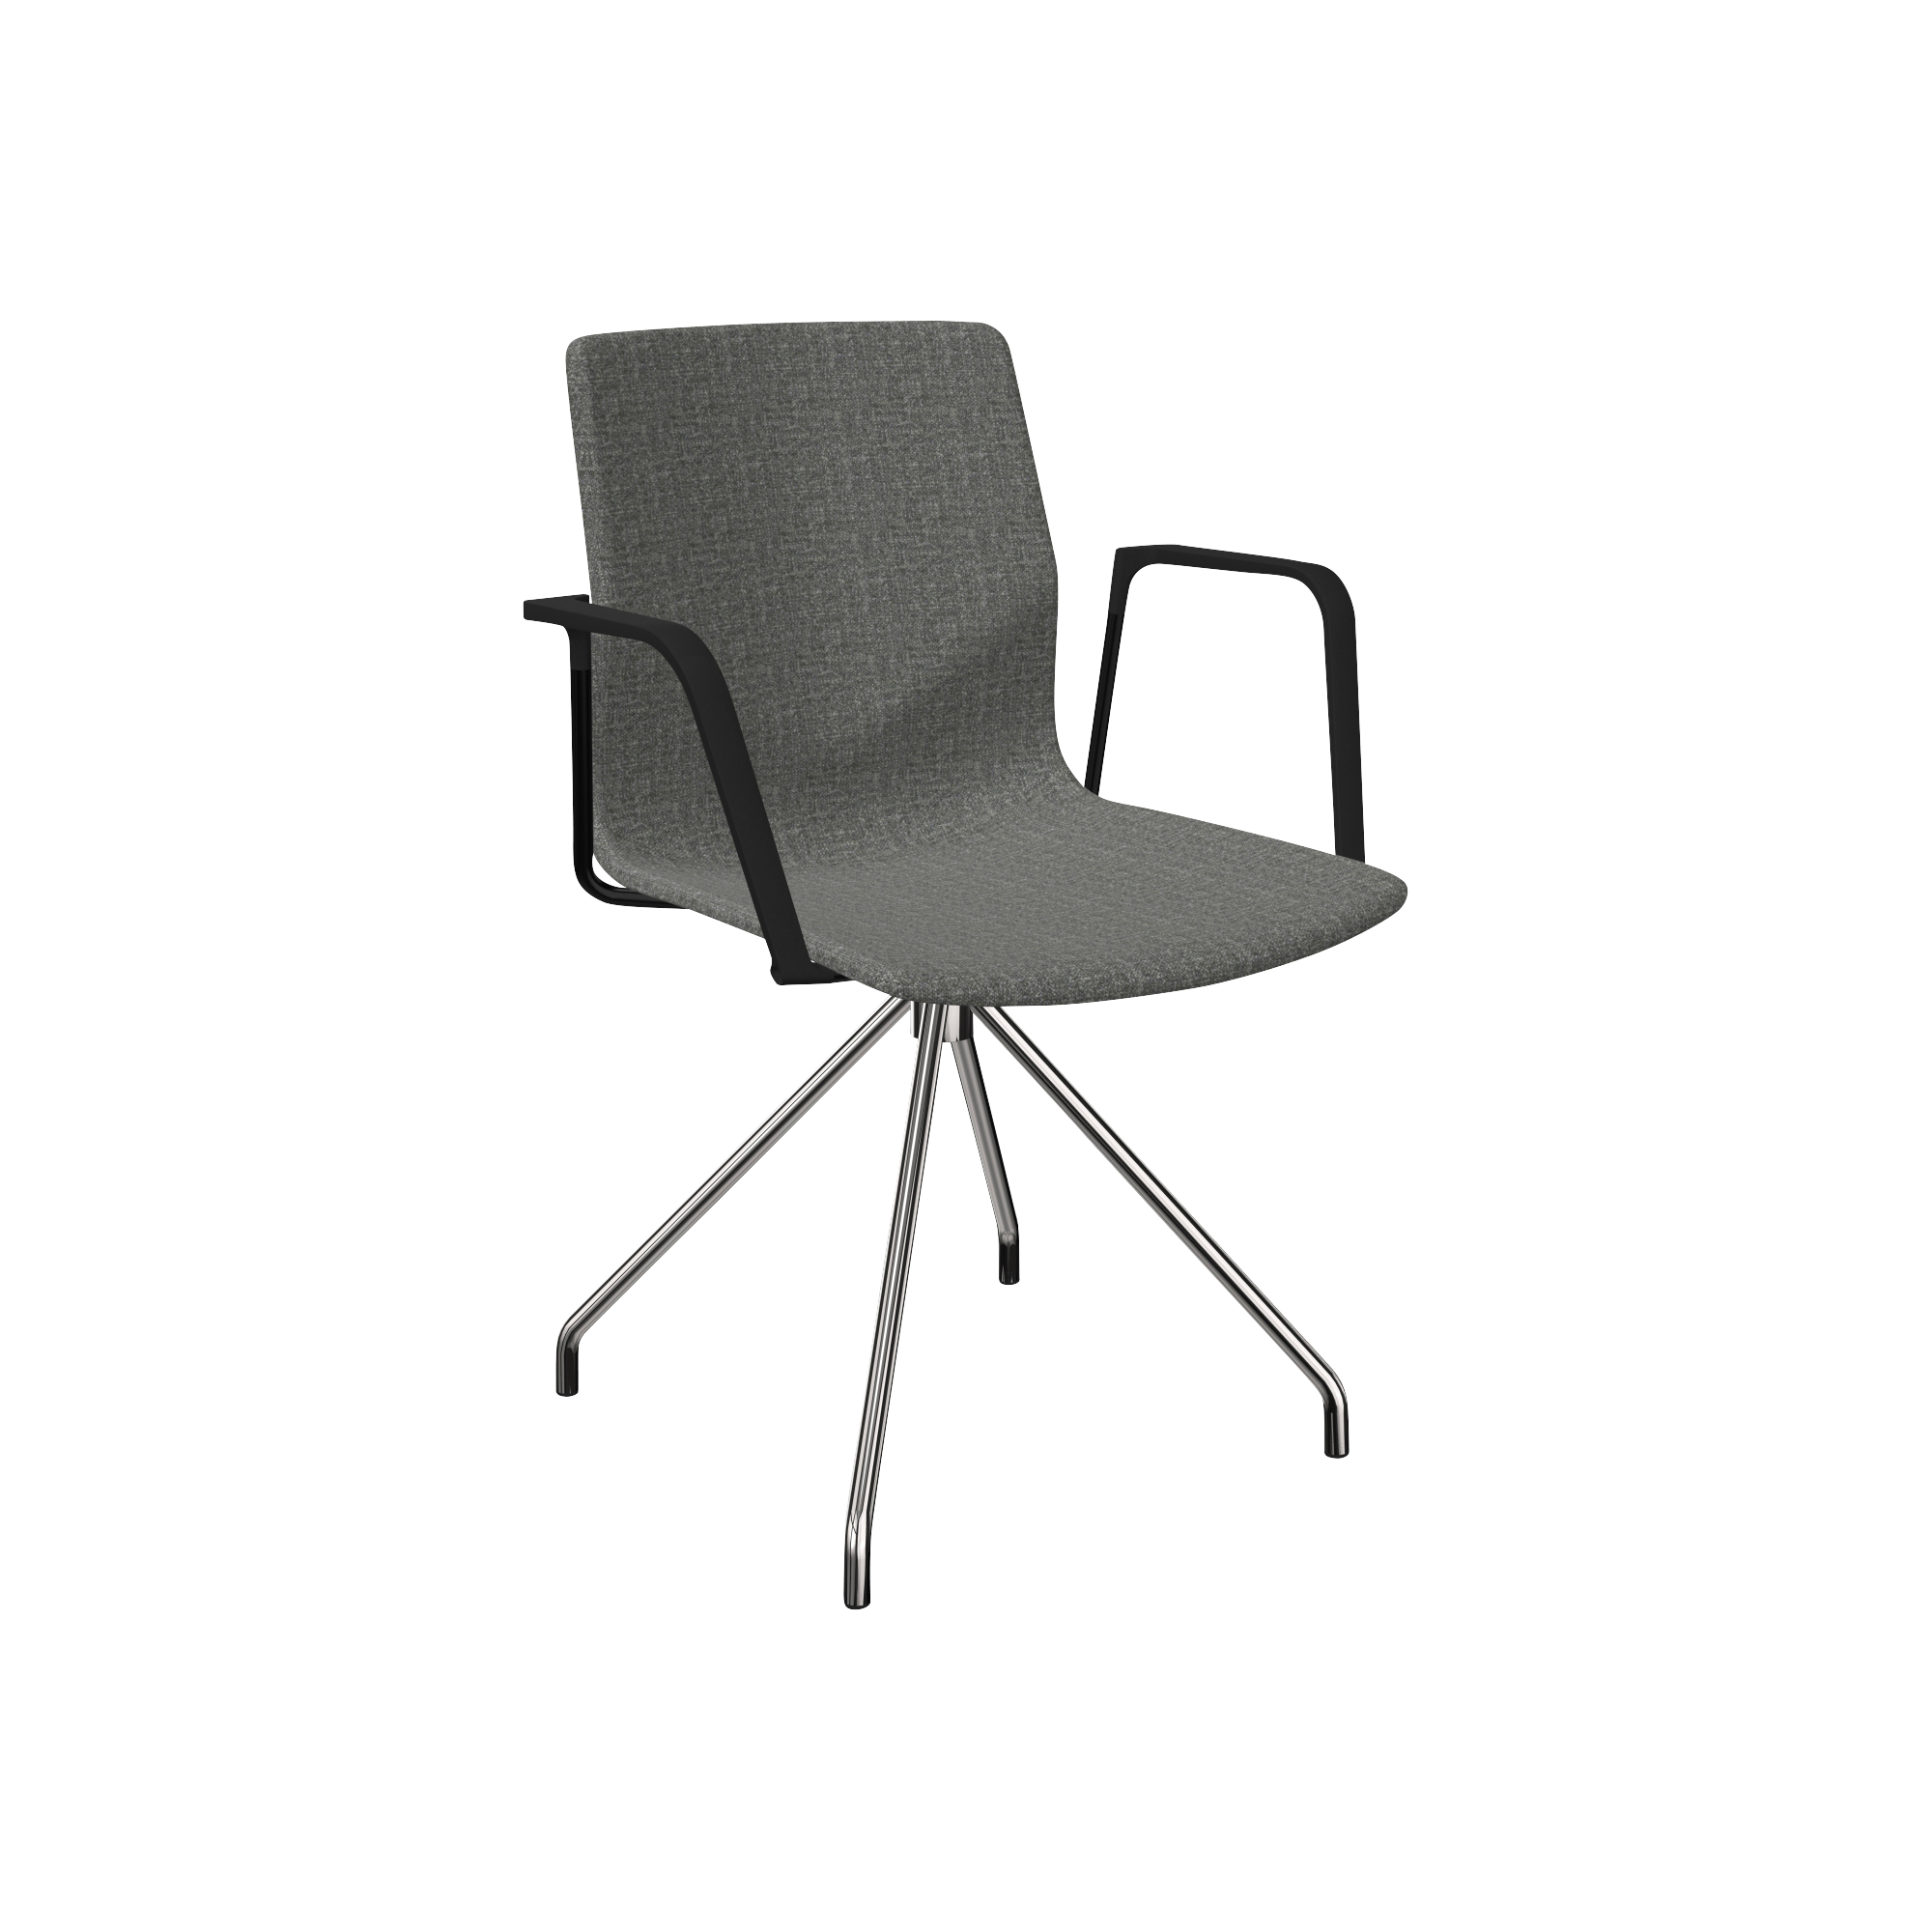 A grey chair with a metal frame and upholstered seat.